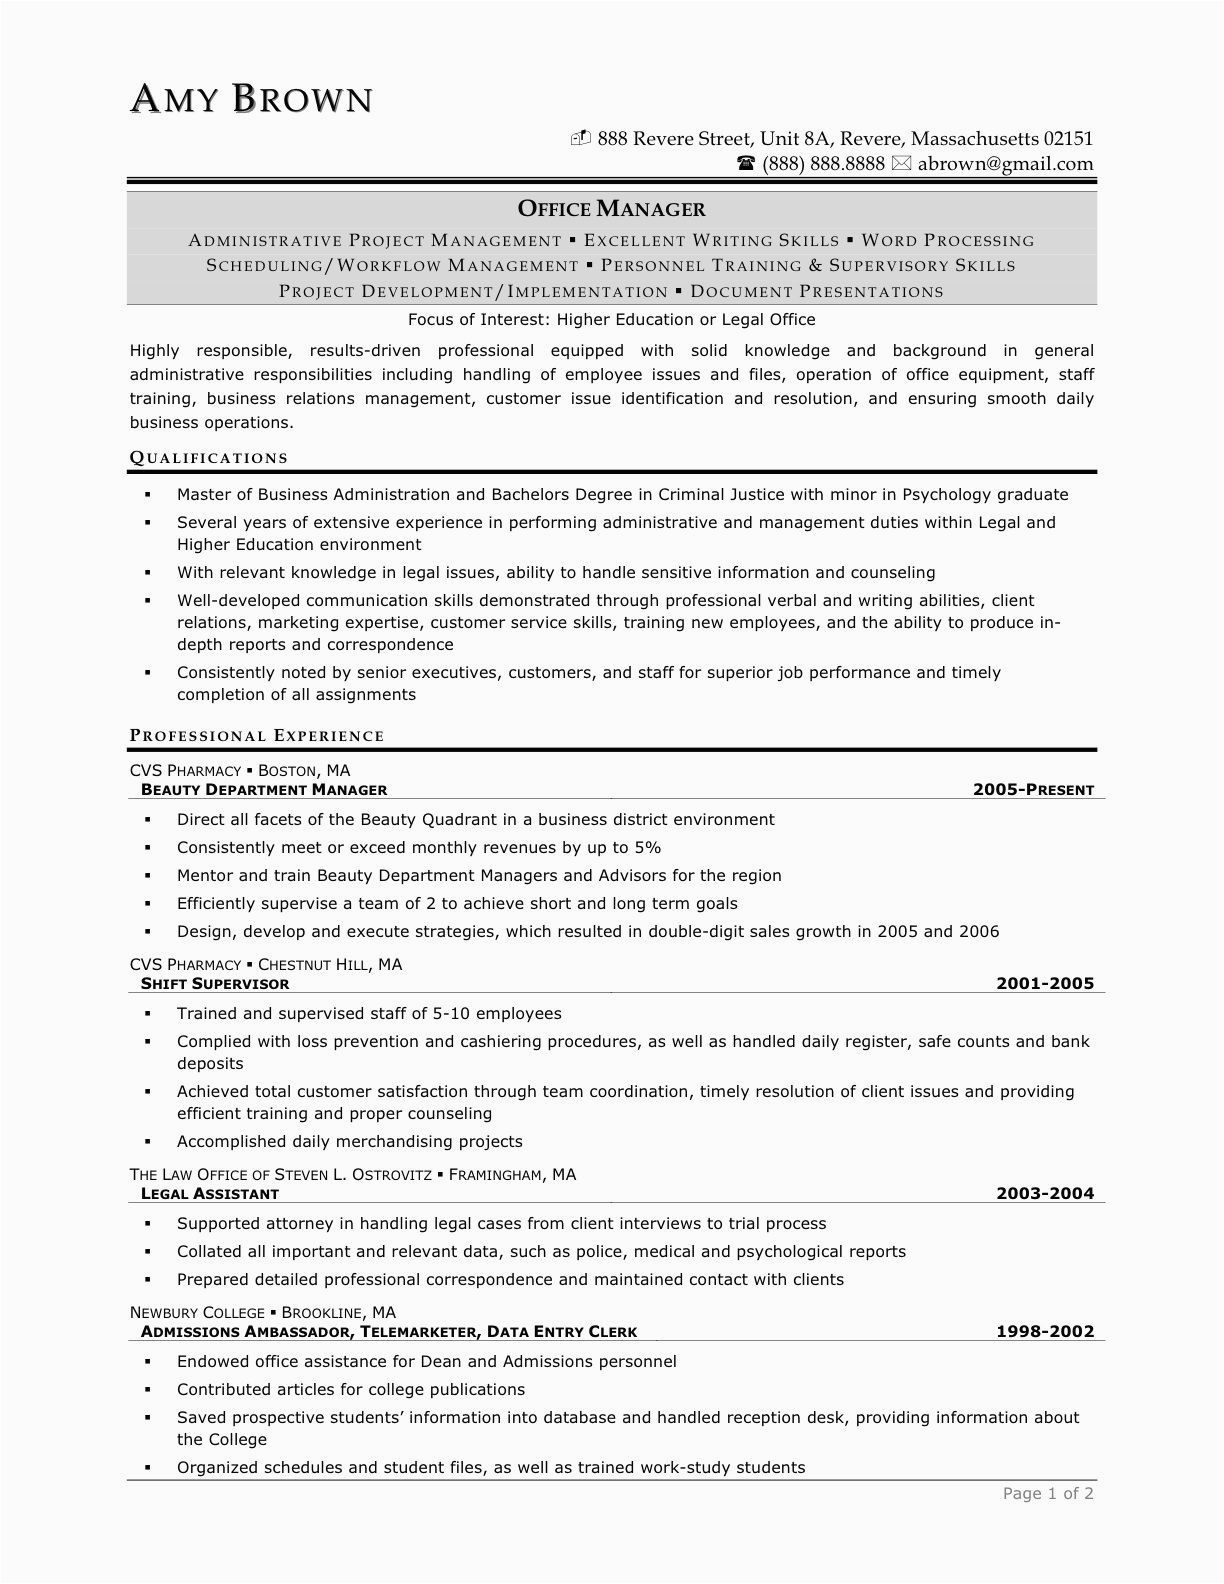 Sample Resume for Paralegal with No Experience Paralegal Resume Sample Paralegal Resume Samples